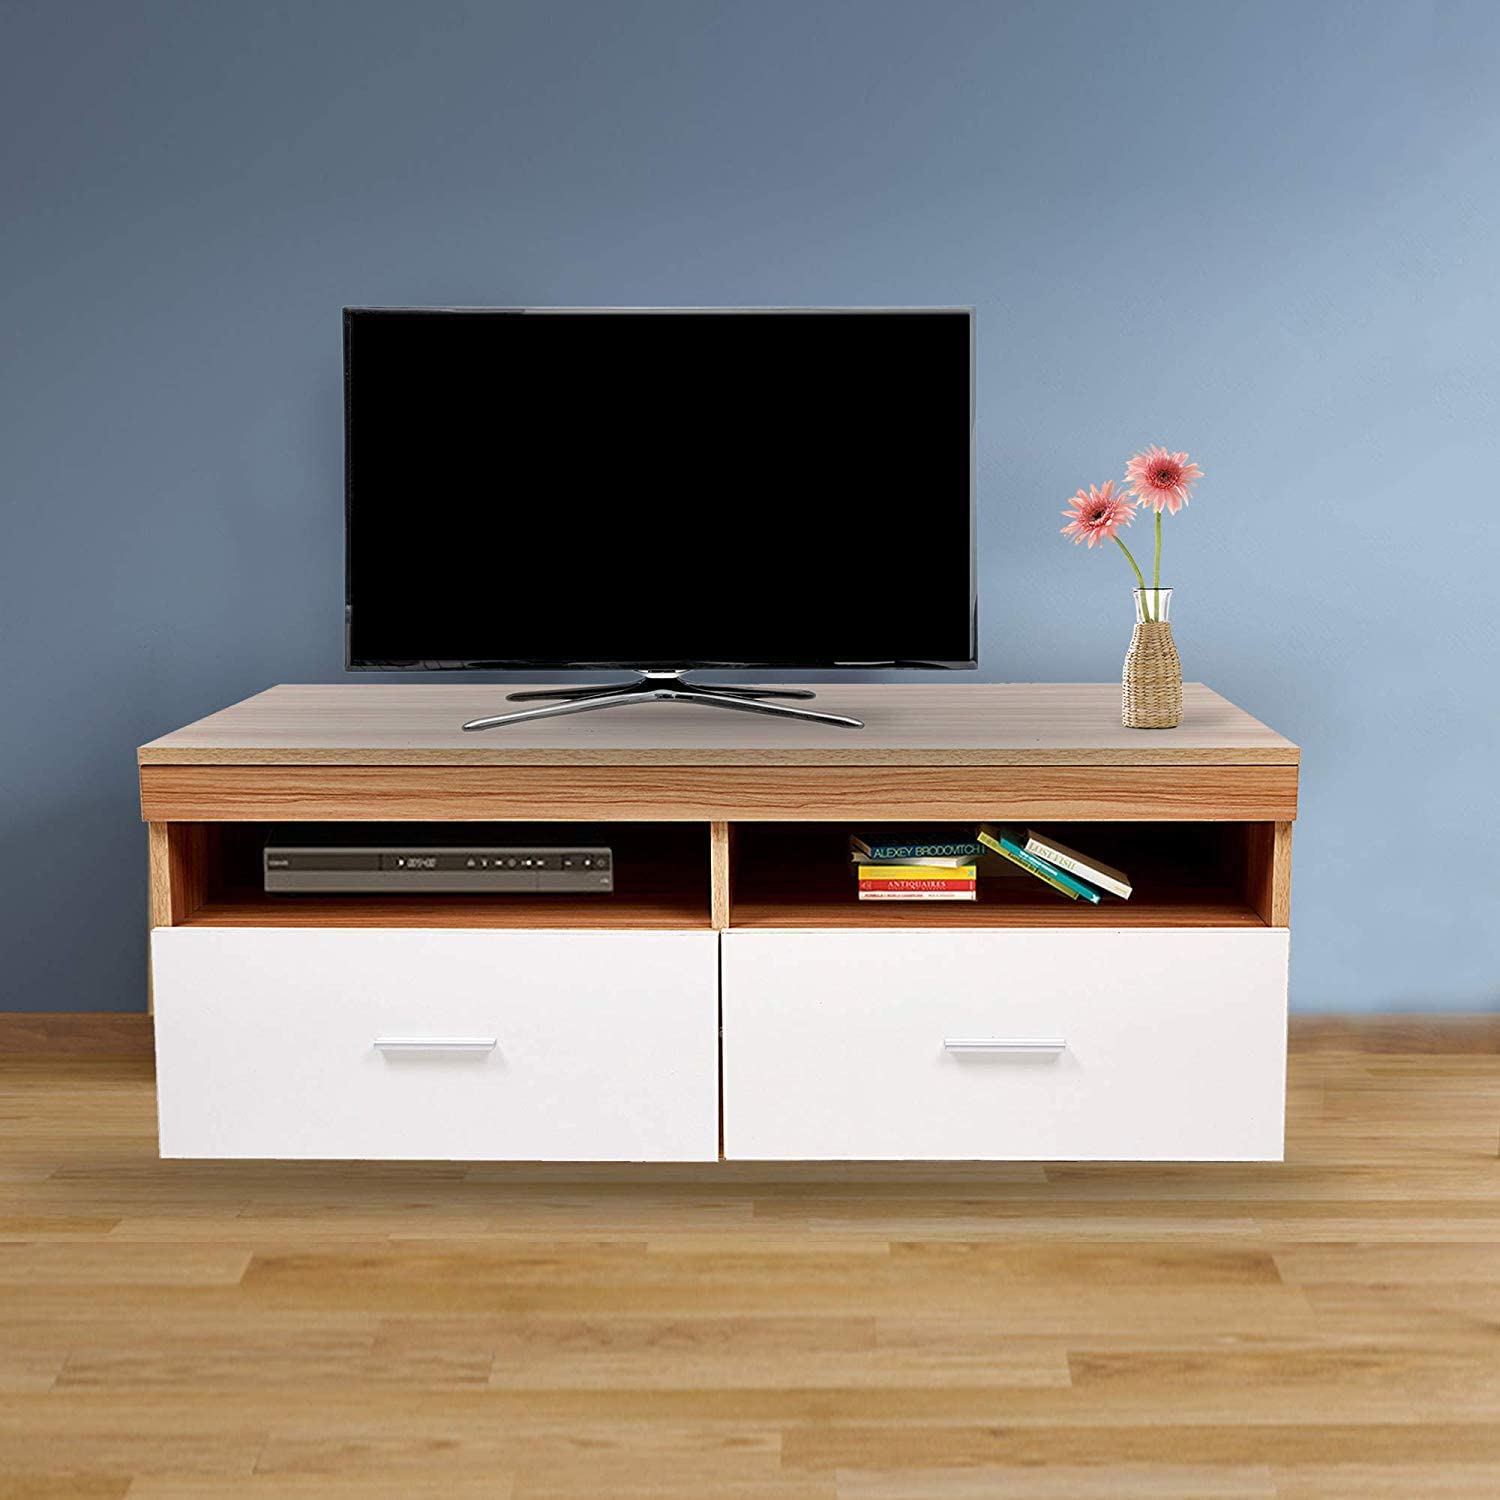 (Out of Stock) Wood Coffee Table with Drawers & Storage Compartments, for Living Room, Oak&White